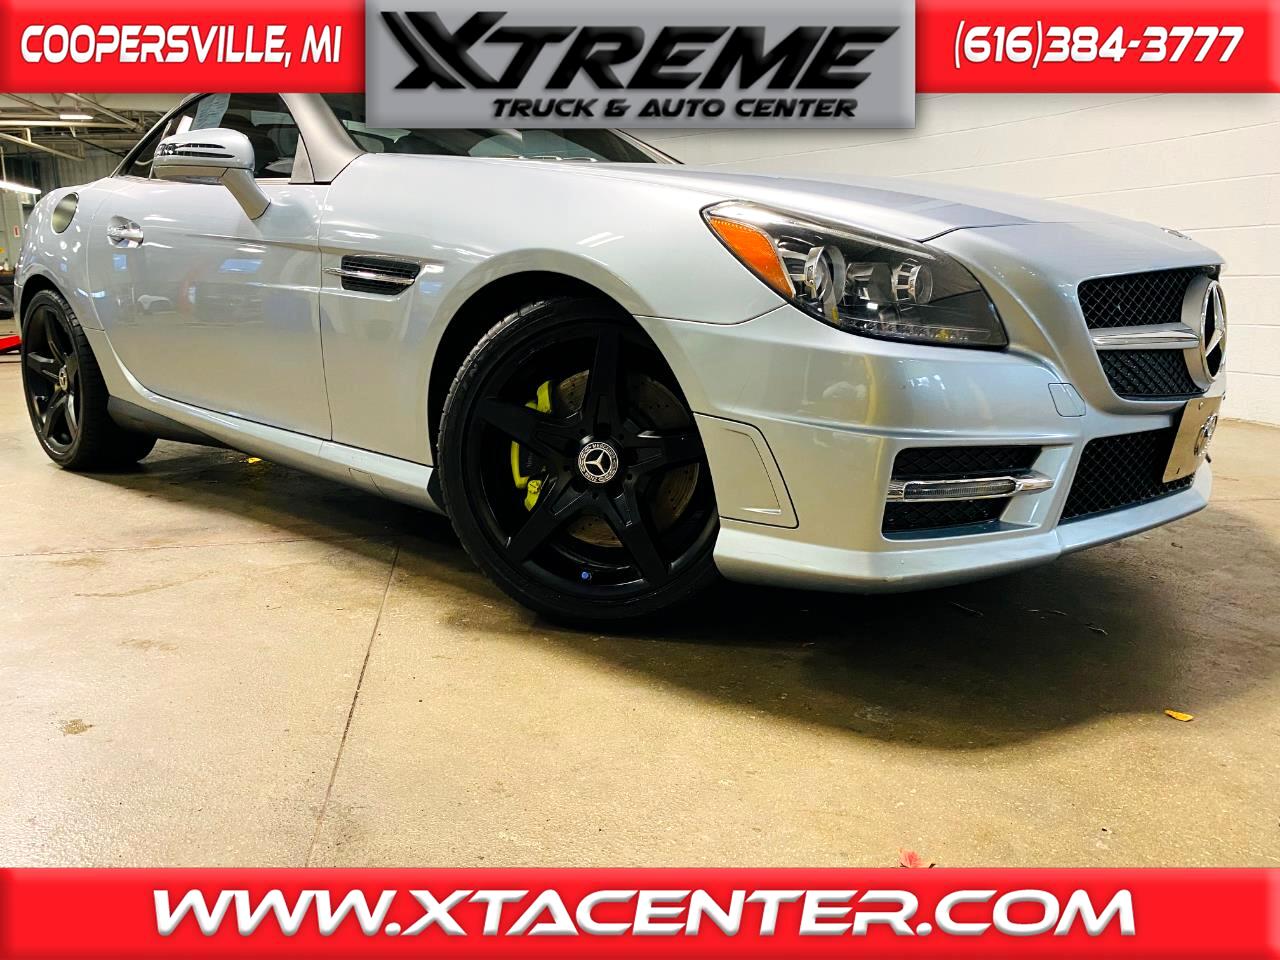 Used 2016 Mercedes-Benz SLK-Class 2dr Roadster SLK 300 for Sale in  Coopersville MI 49404 Xtreme Truck & Auto Center